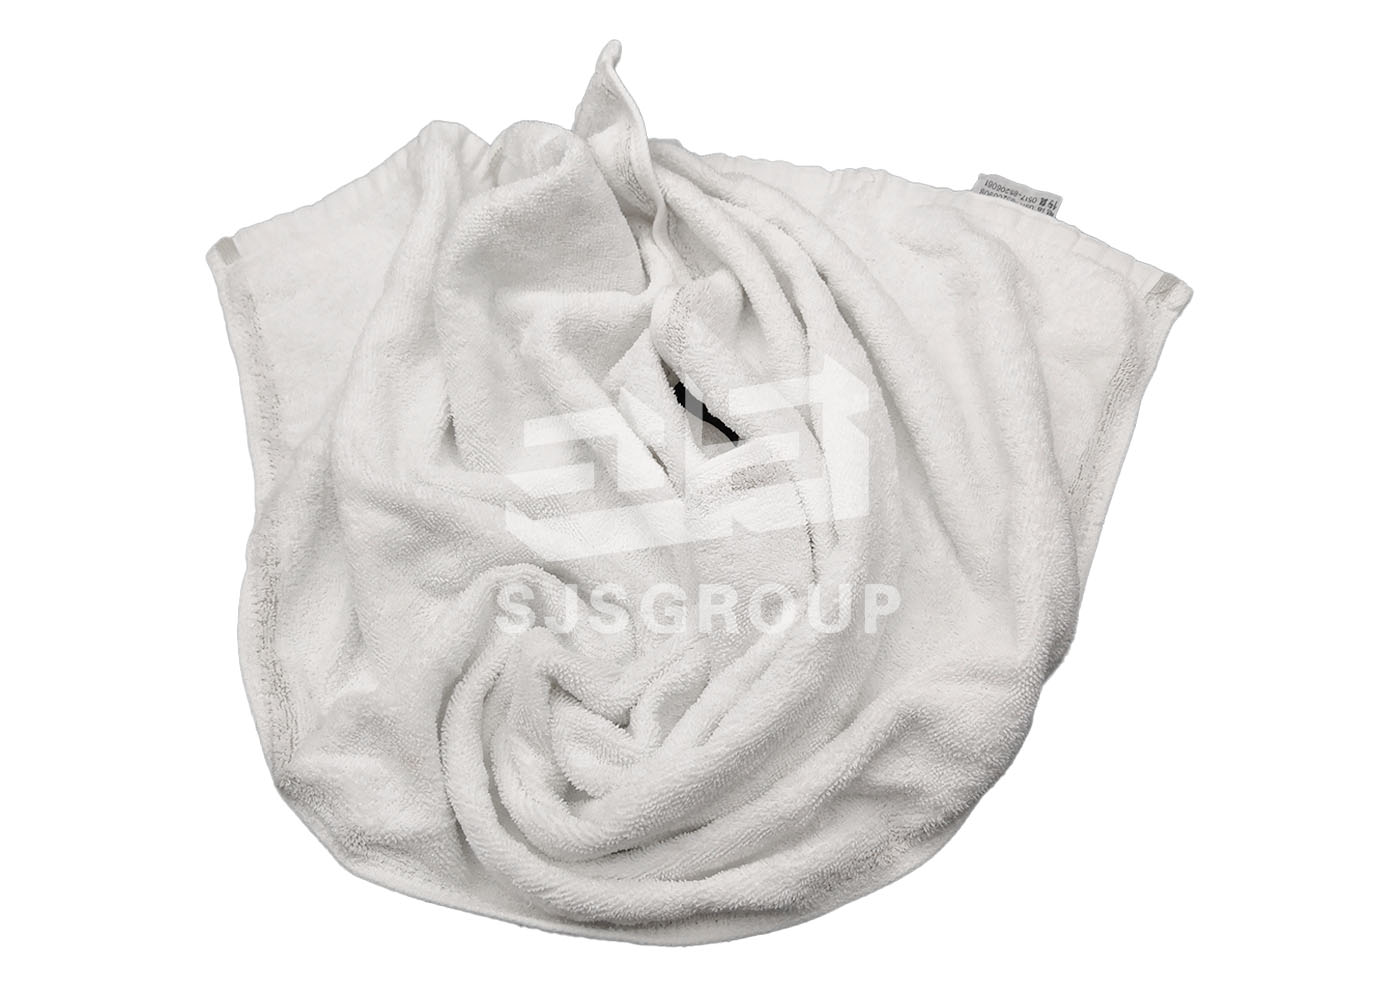 White Towel Rags-Mixed file Towel Cotton Rags Grade C